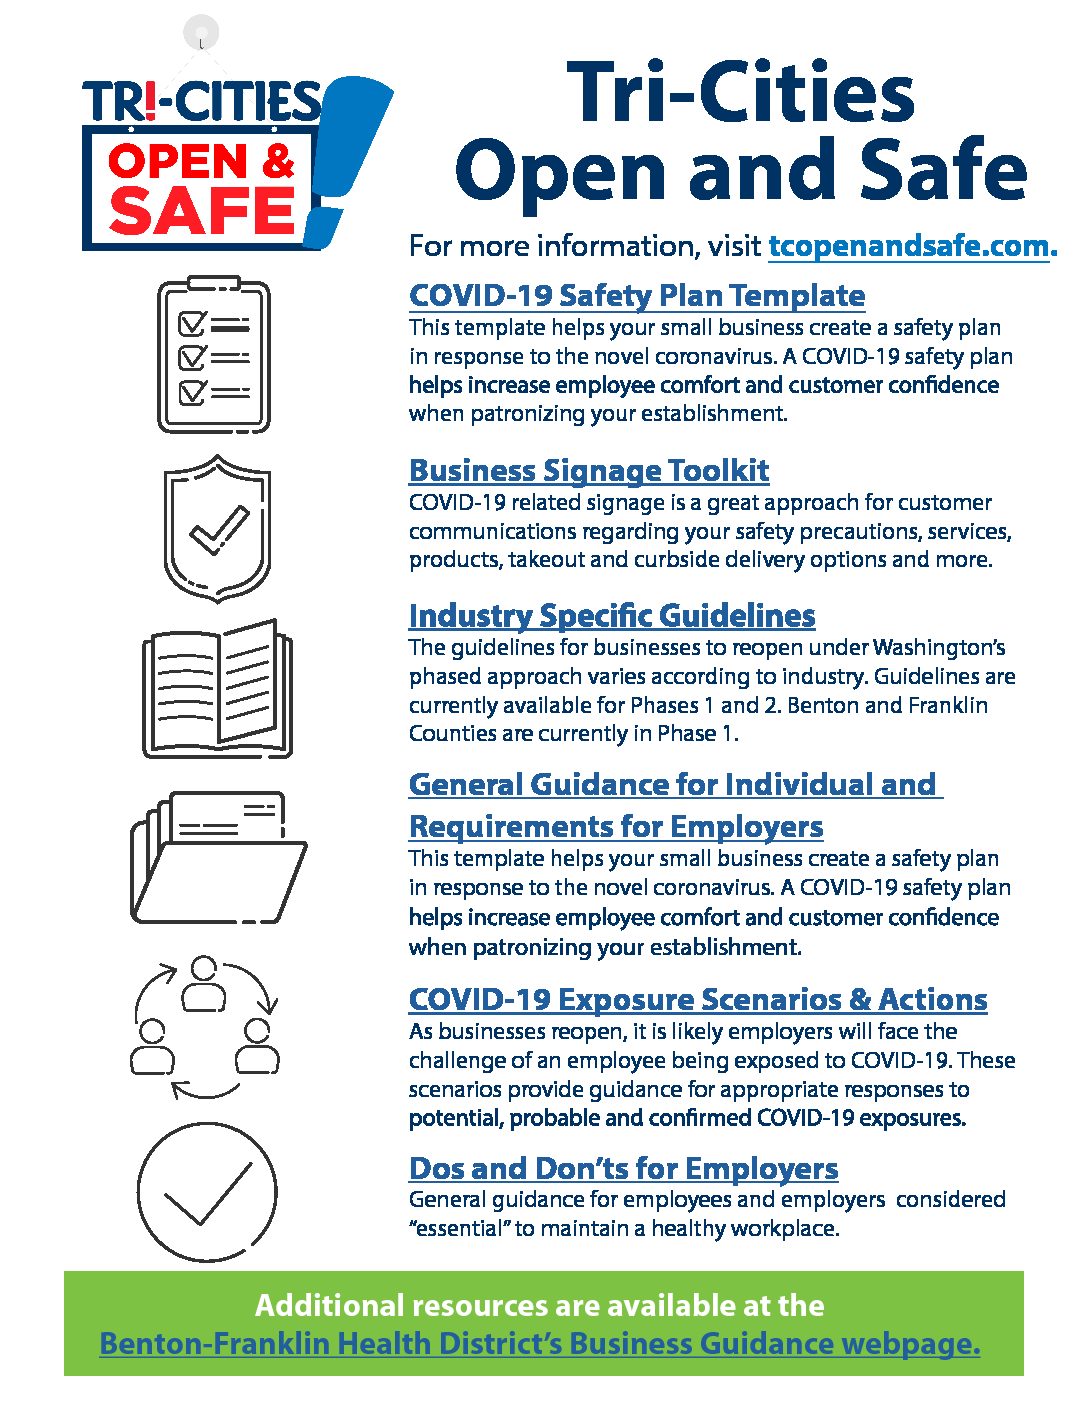 Open Safe A New Coalition Of Business Economic And Community Leaders - Tridec